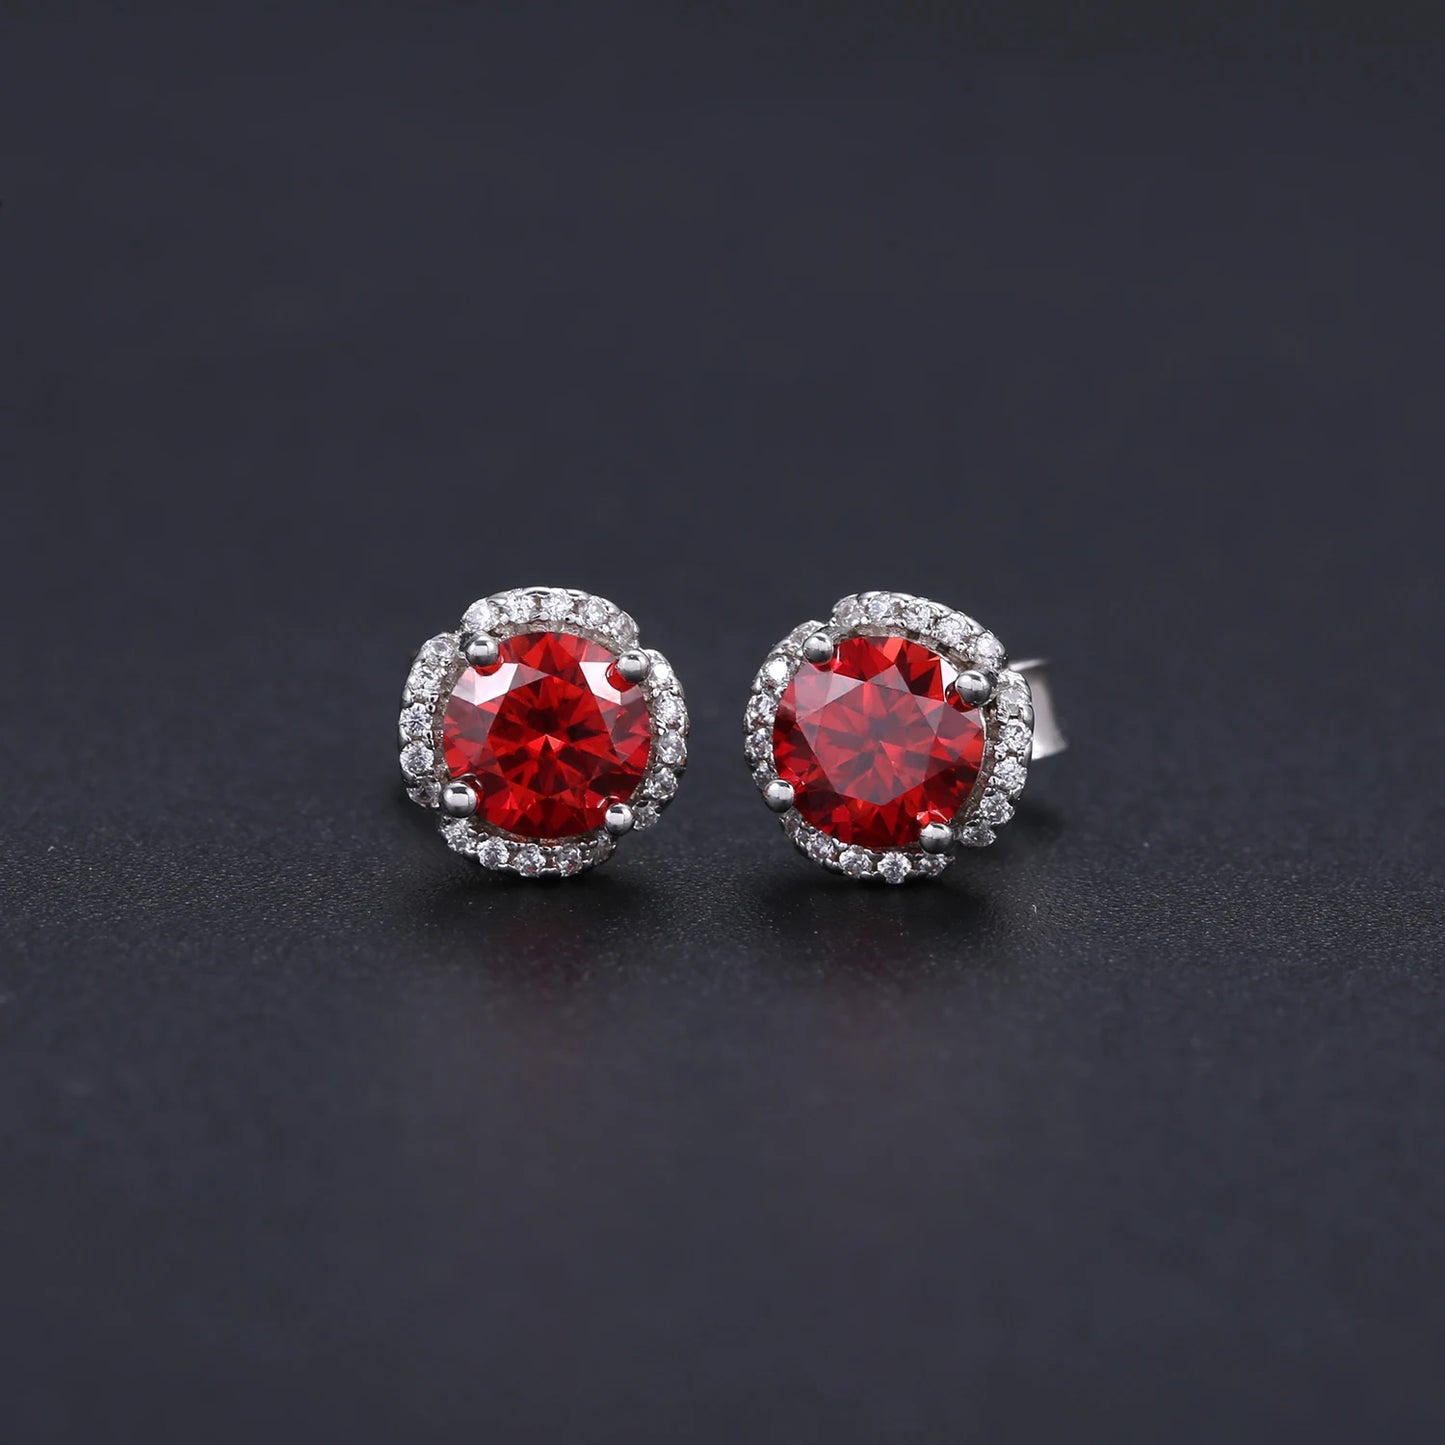 GEM'S BALLET Pink Moissanite 0.5TW 5mm Round Cut Moissanite Halo Stud Earrings in 925 Sterling Silver Wedding Earrings Garnet Moissanite 925 Sterling Silver CHINA